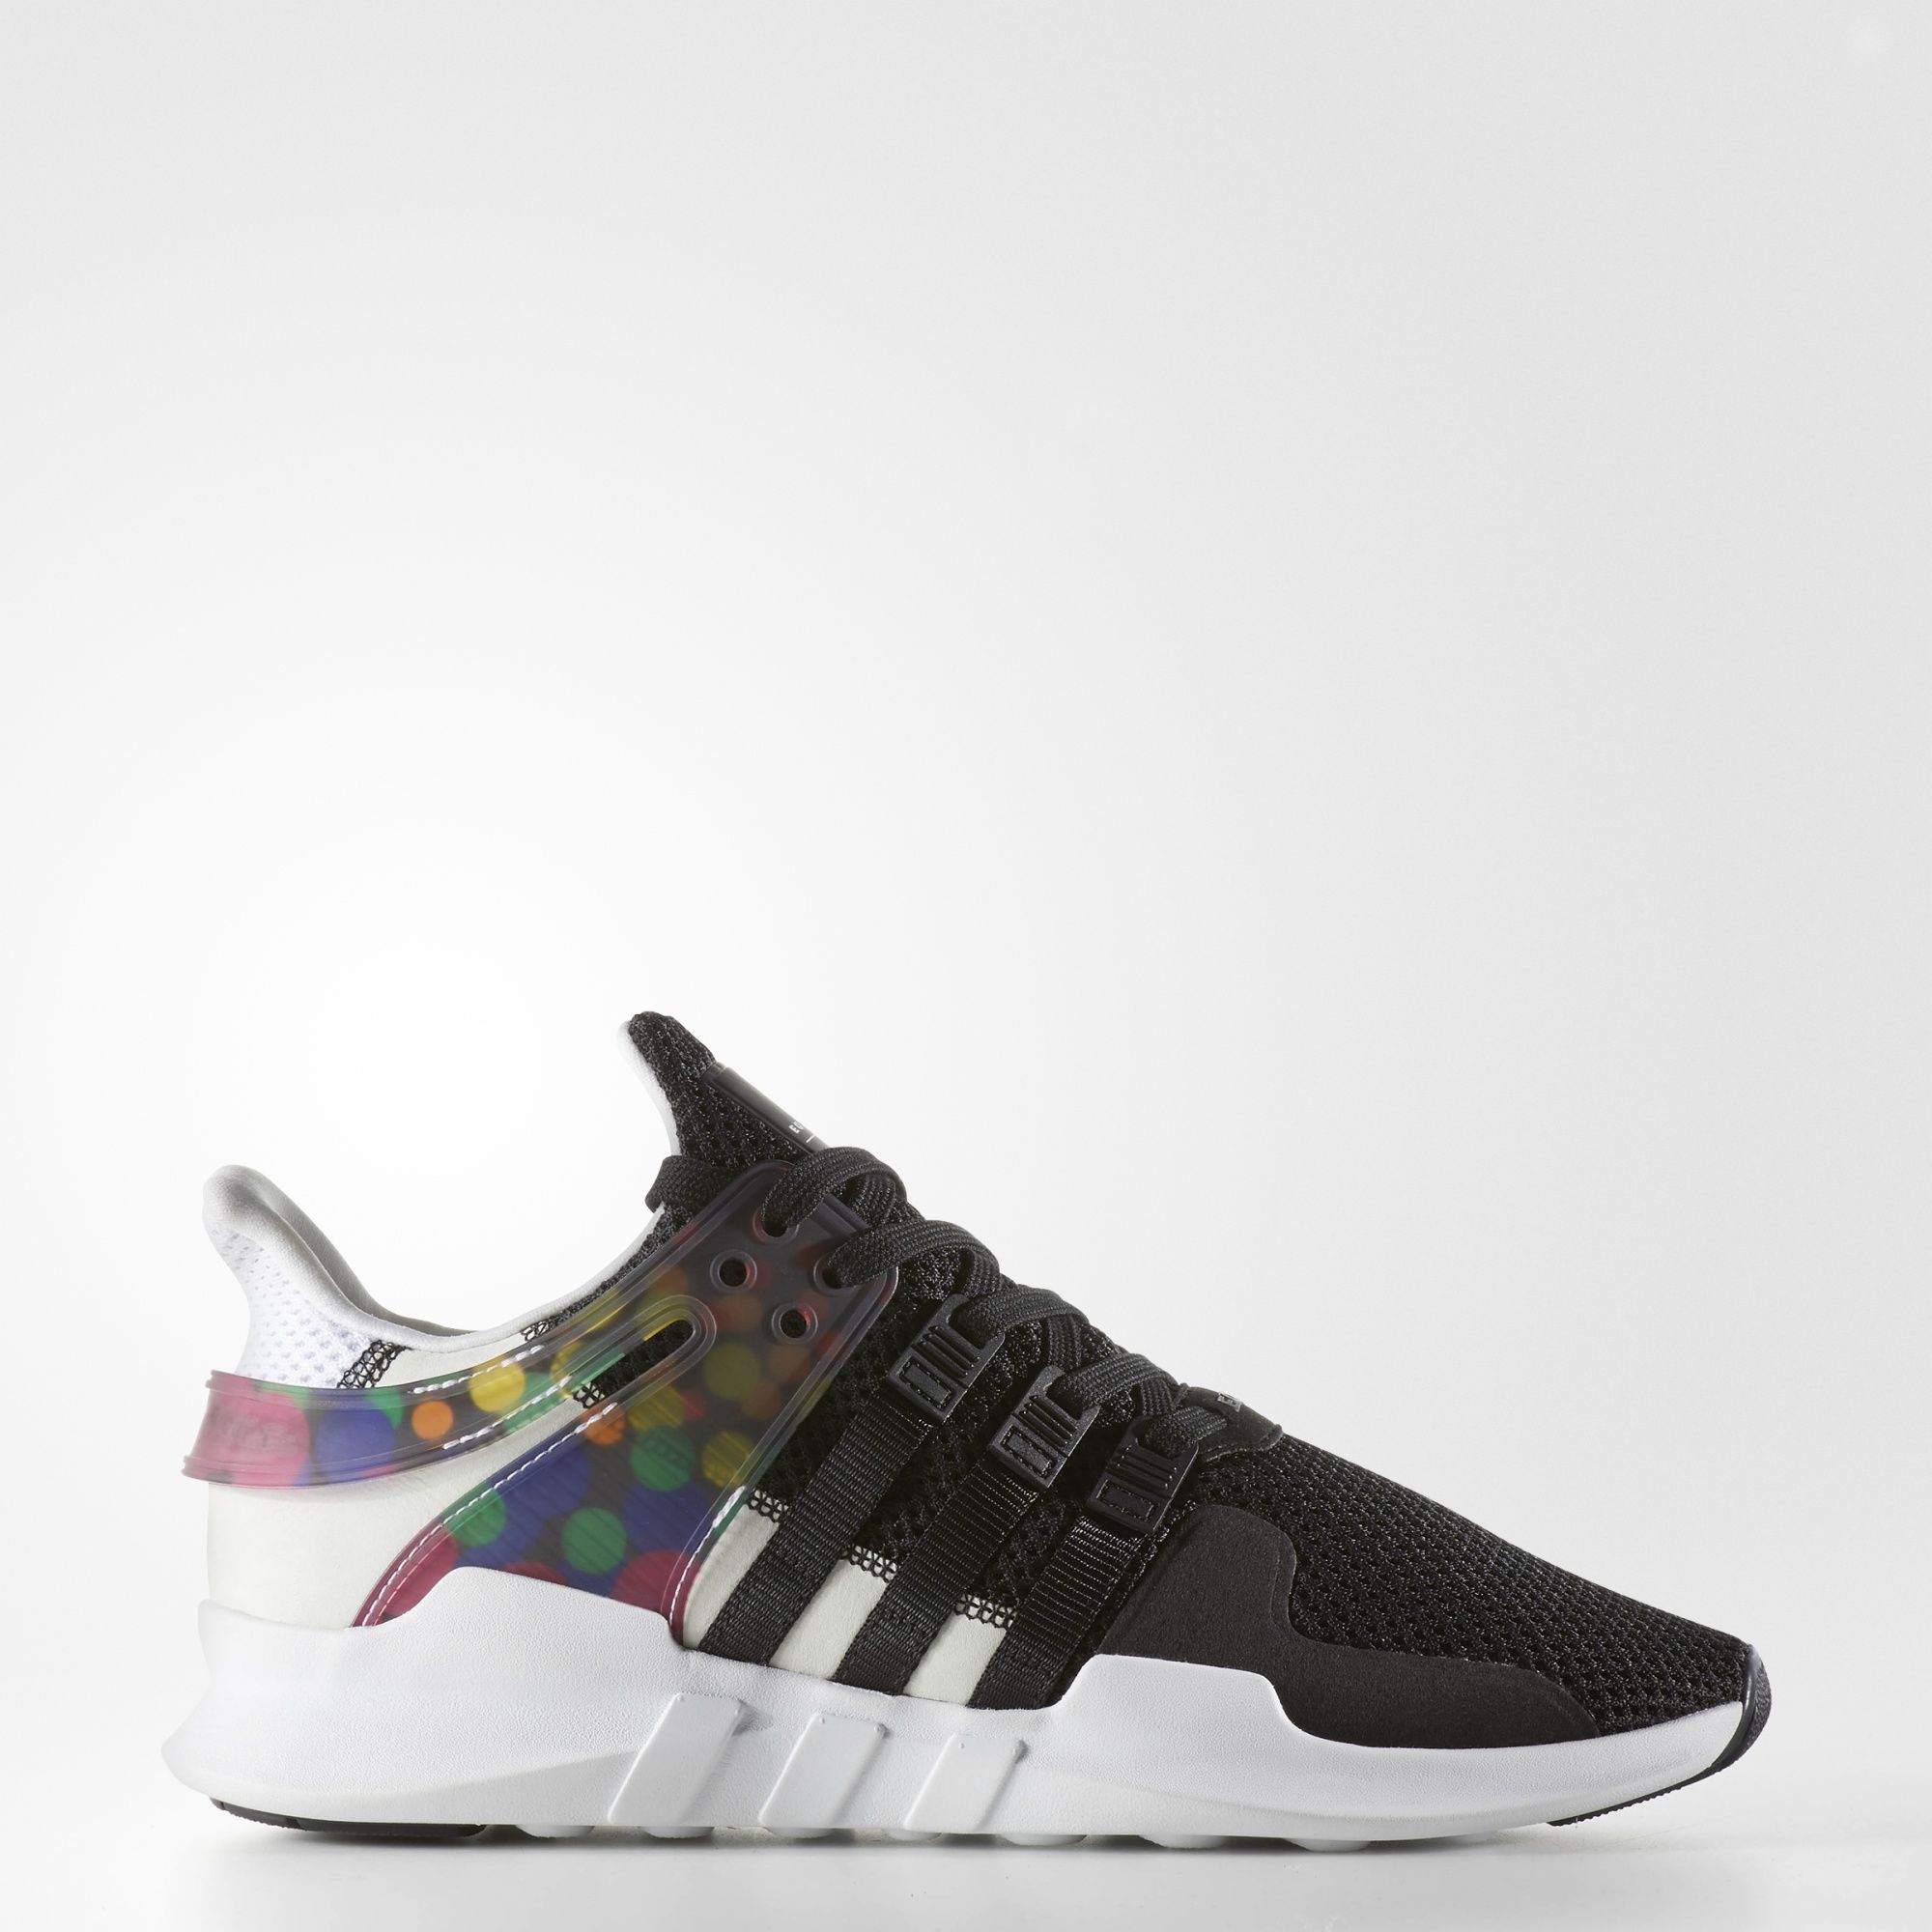 adidas-eqt-support-adv-pride-pack-2